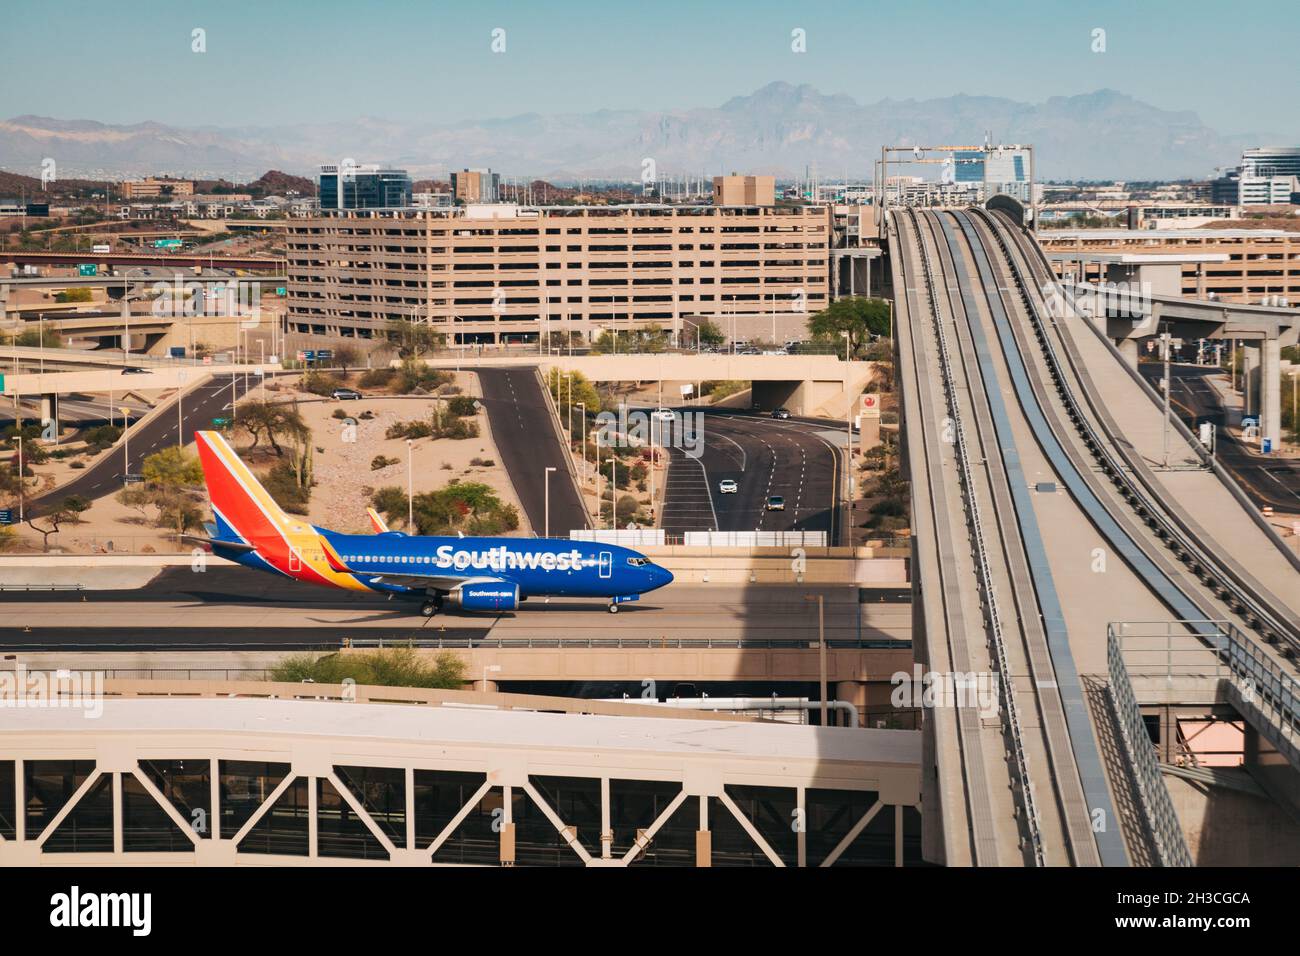 a Southwest Airlines Boeing 737 jet taxis under the PHX Sky Train tracks at Phoenix Sky Harbor Airport, Arizona, USA Stock Photo